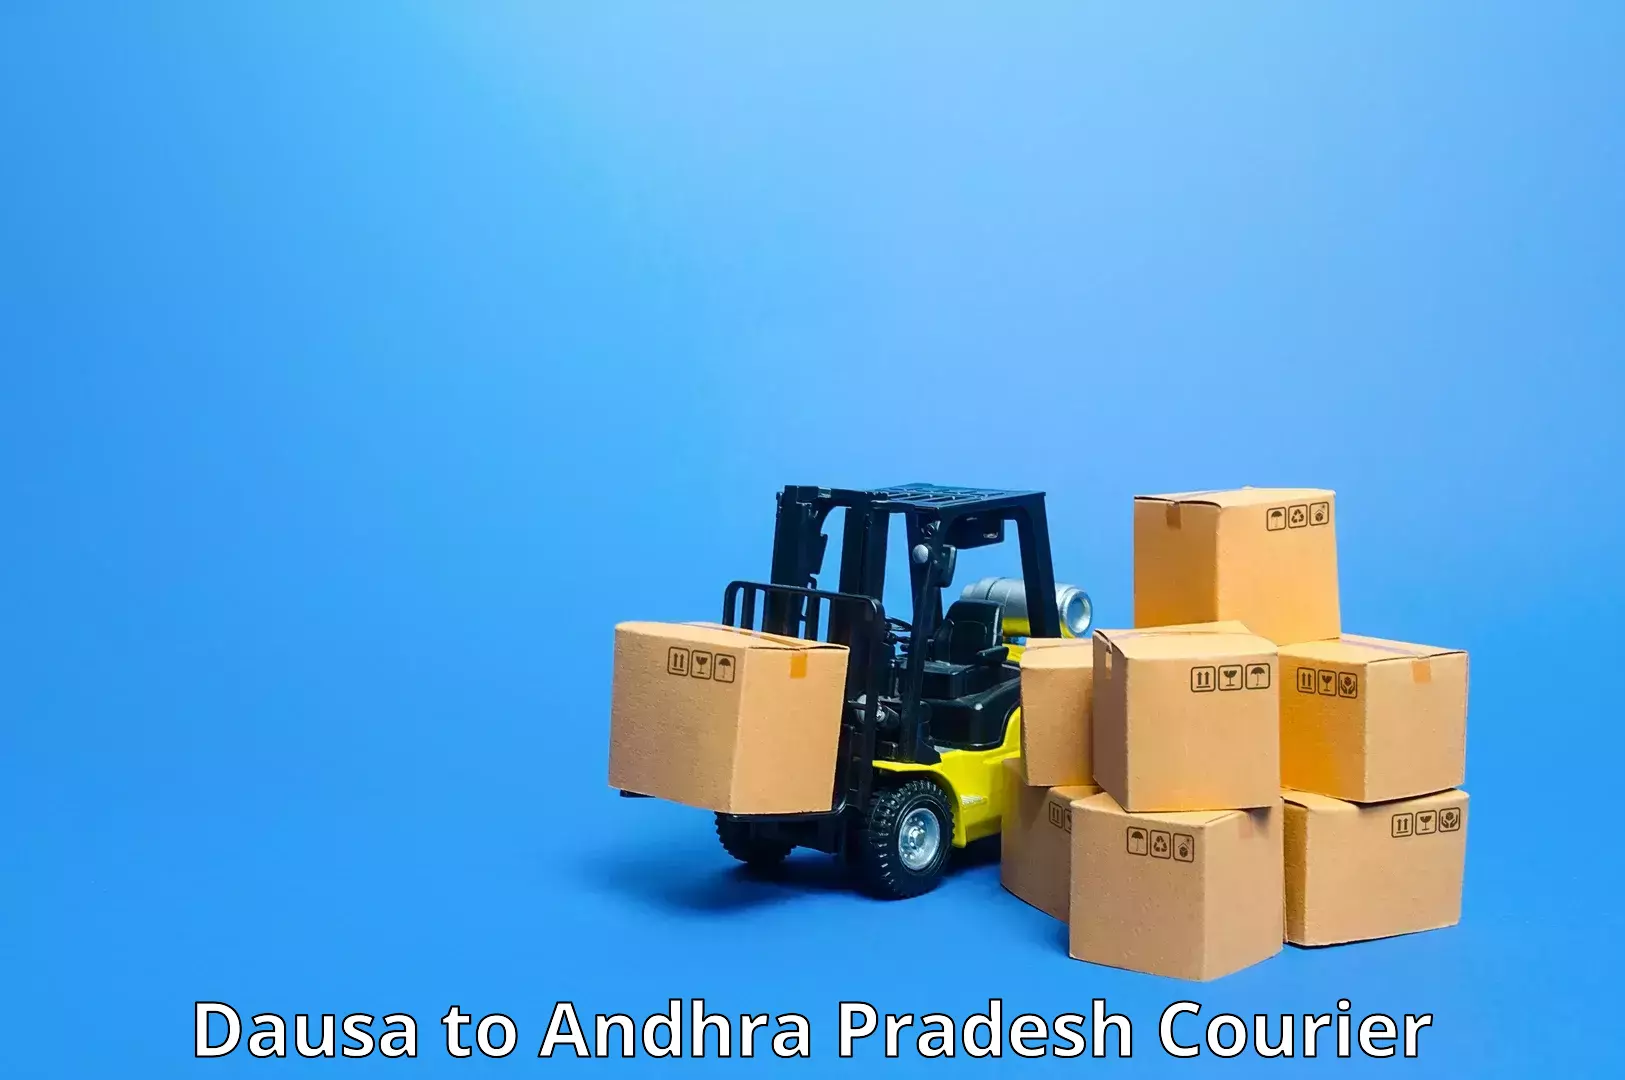 Express delivery capabilities Dausa to Atmakur Nandyal